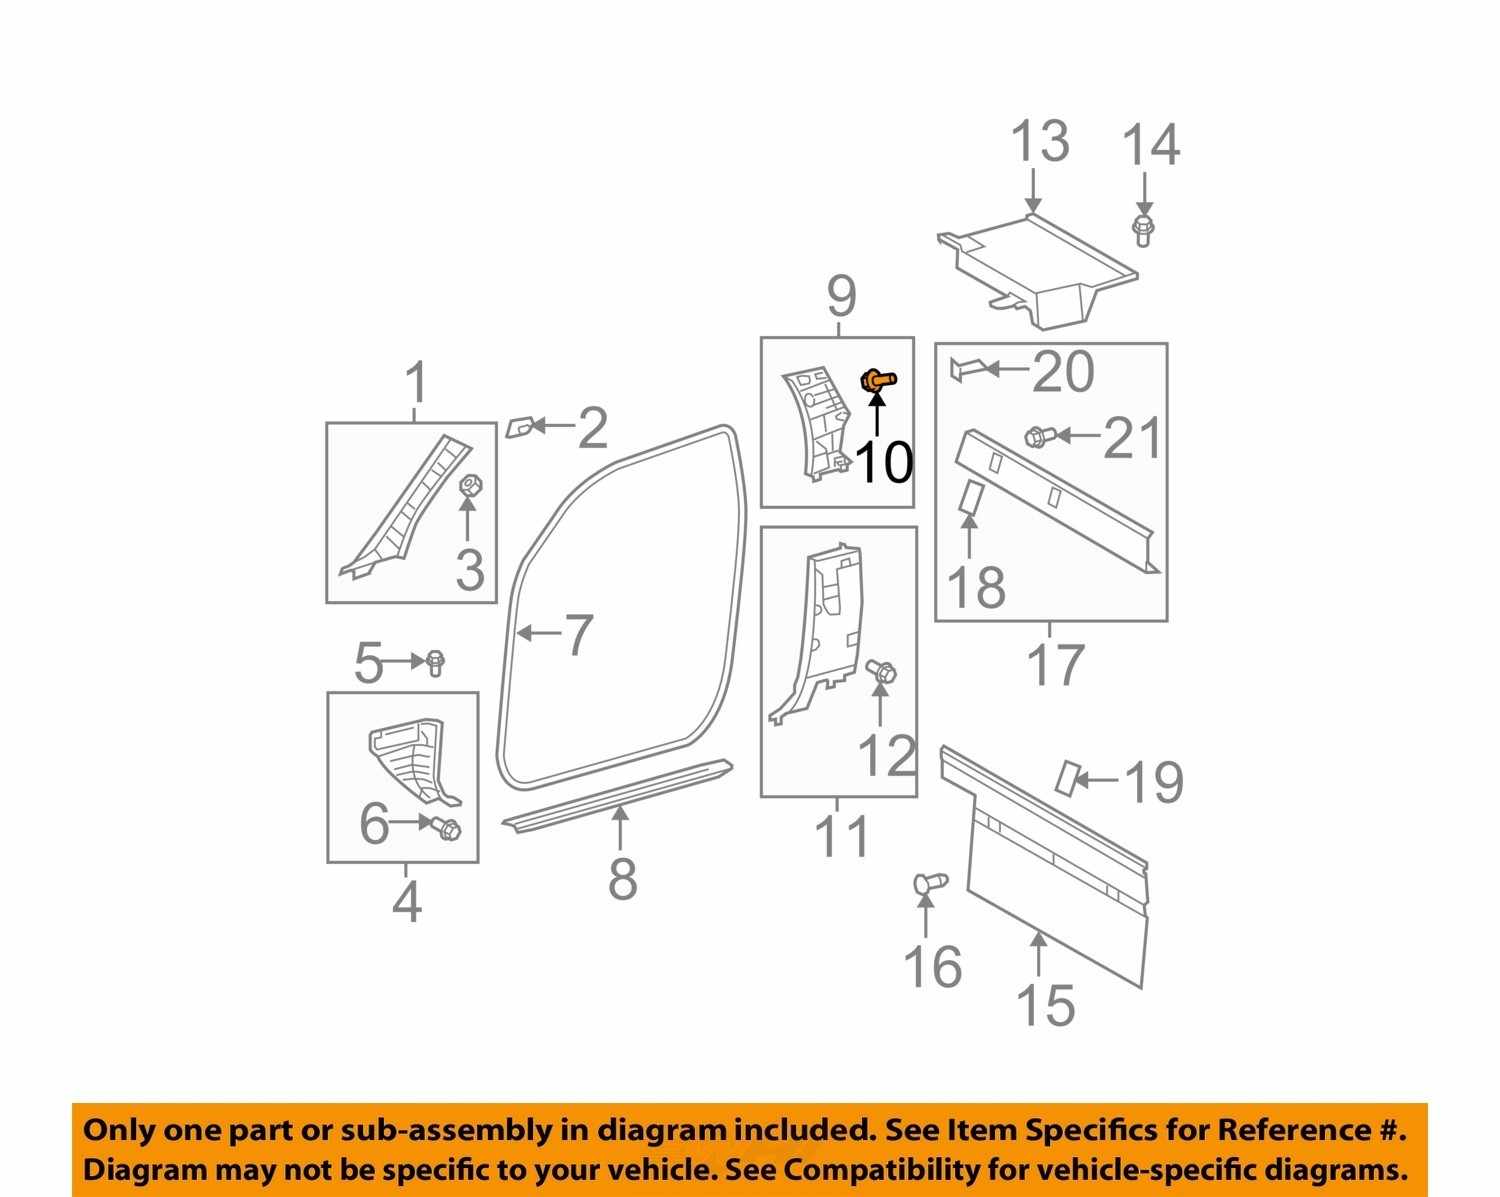 Details About Toyota Oem Interior Rear Door Frame Trim Clip 90467 A0006 Factory One Only